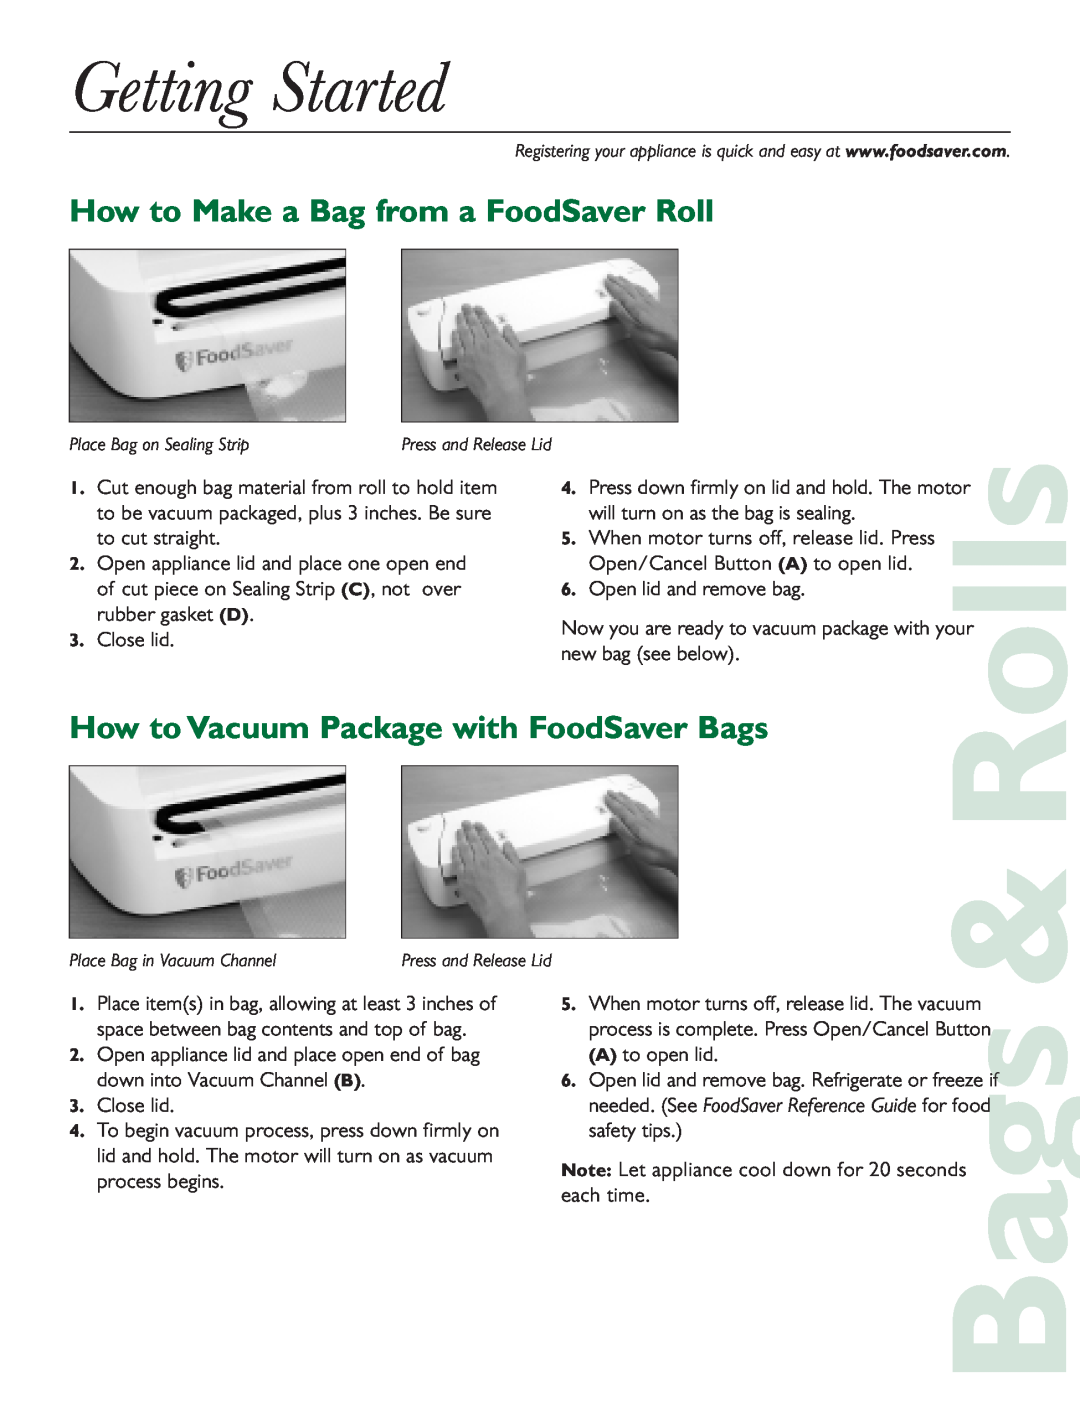 FoodSaver V300 How to Make a Bag from a FoodSaver Roll, How to Vacuum Package with FoodSaver Bags, Getting Started, Rolls 